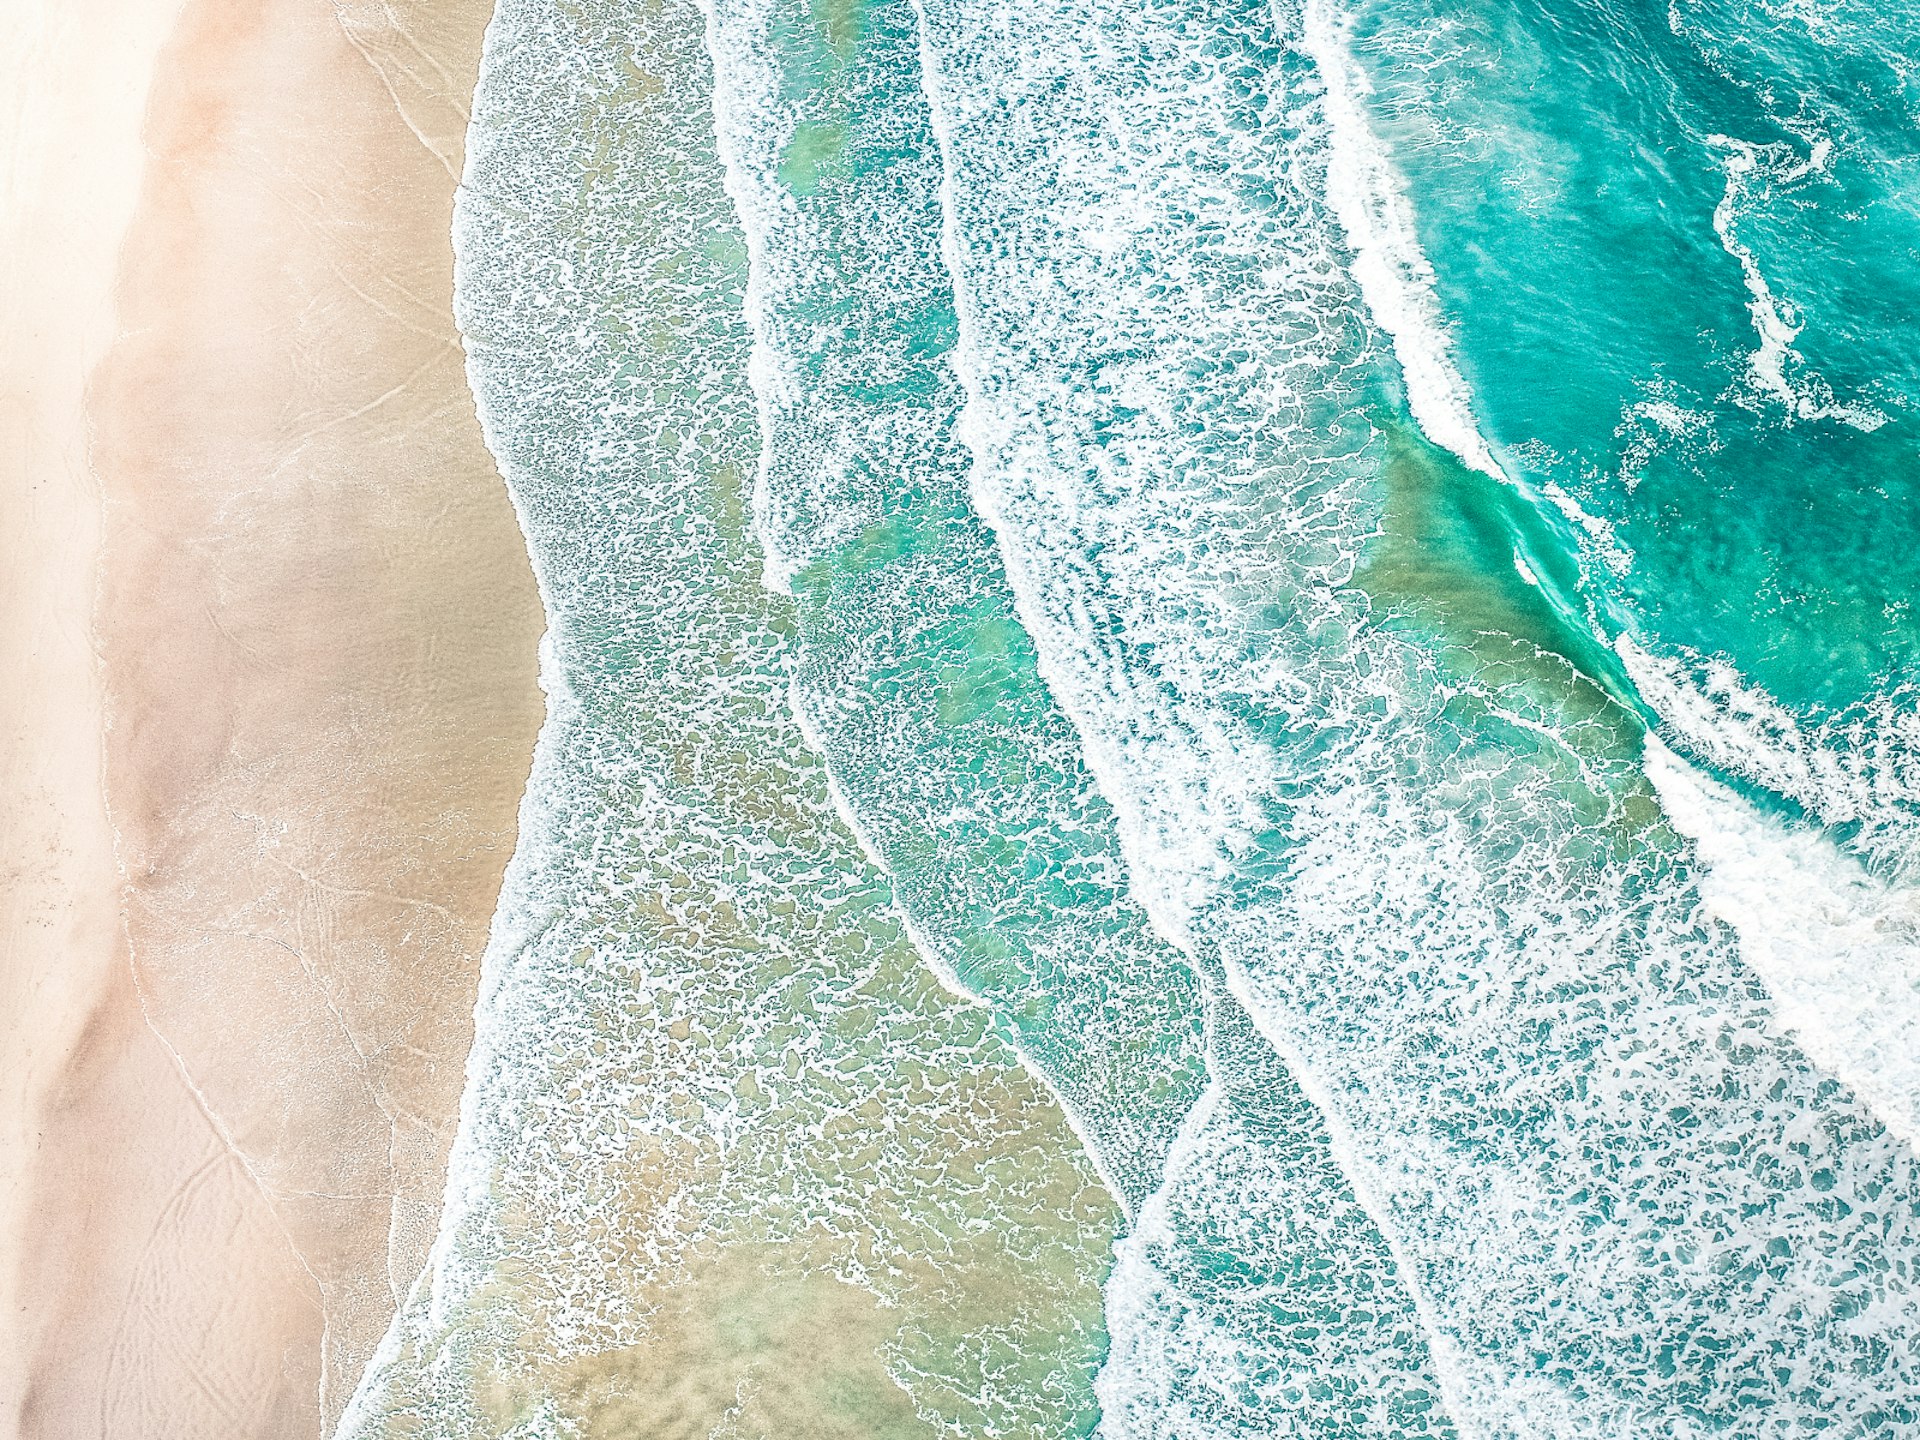 An aerial view of waves crashing on a beach